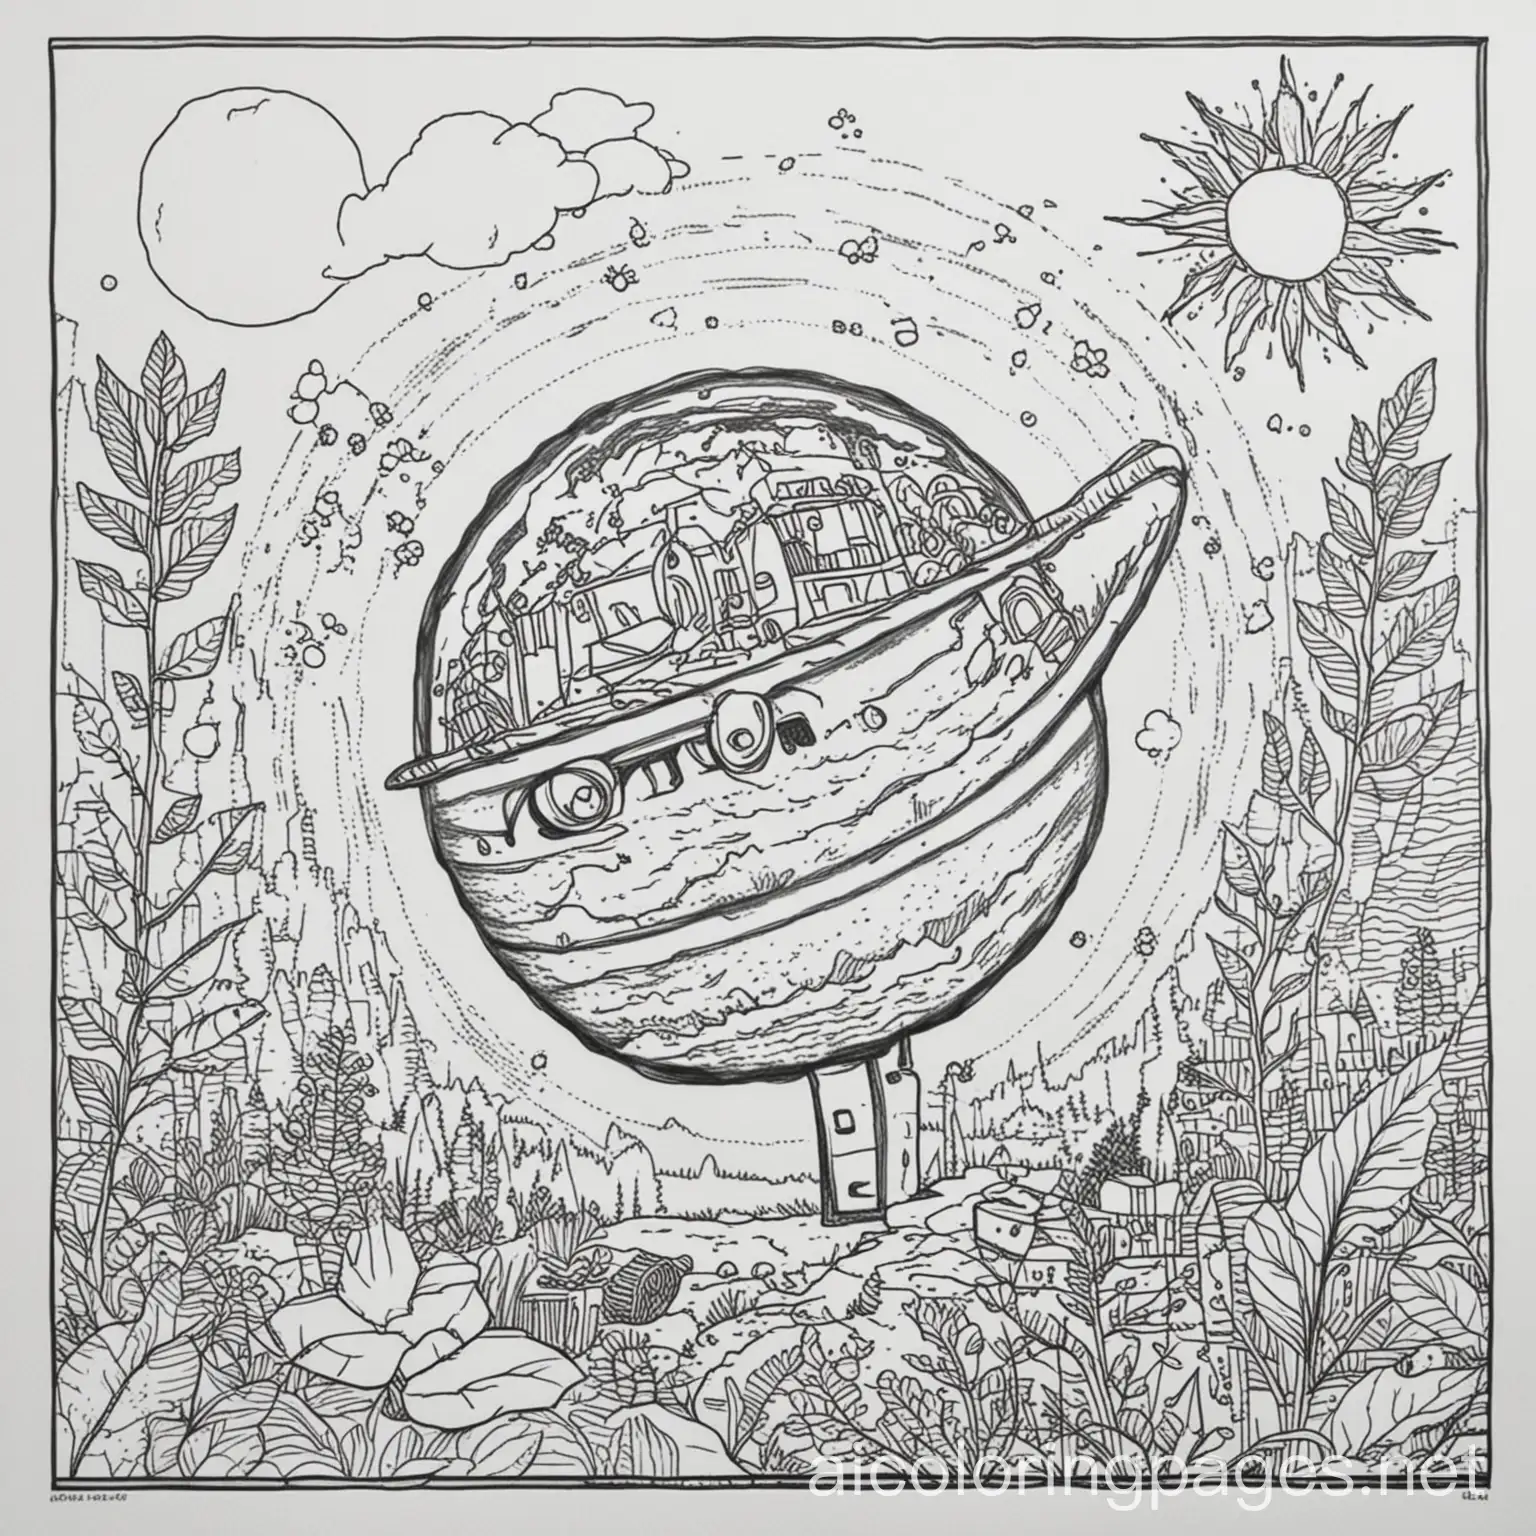 Nature, the environment, climate change, recycling, science, and stopping climate change. Coloring Page, black and white, line art, white background, Simplicity, Ample White Space. The background of the coloring page is plain white to make it easy for young children to color within the lines. The outlines of all the subjects are easy to distinguish, making it simple for kids to color without too much difficulty